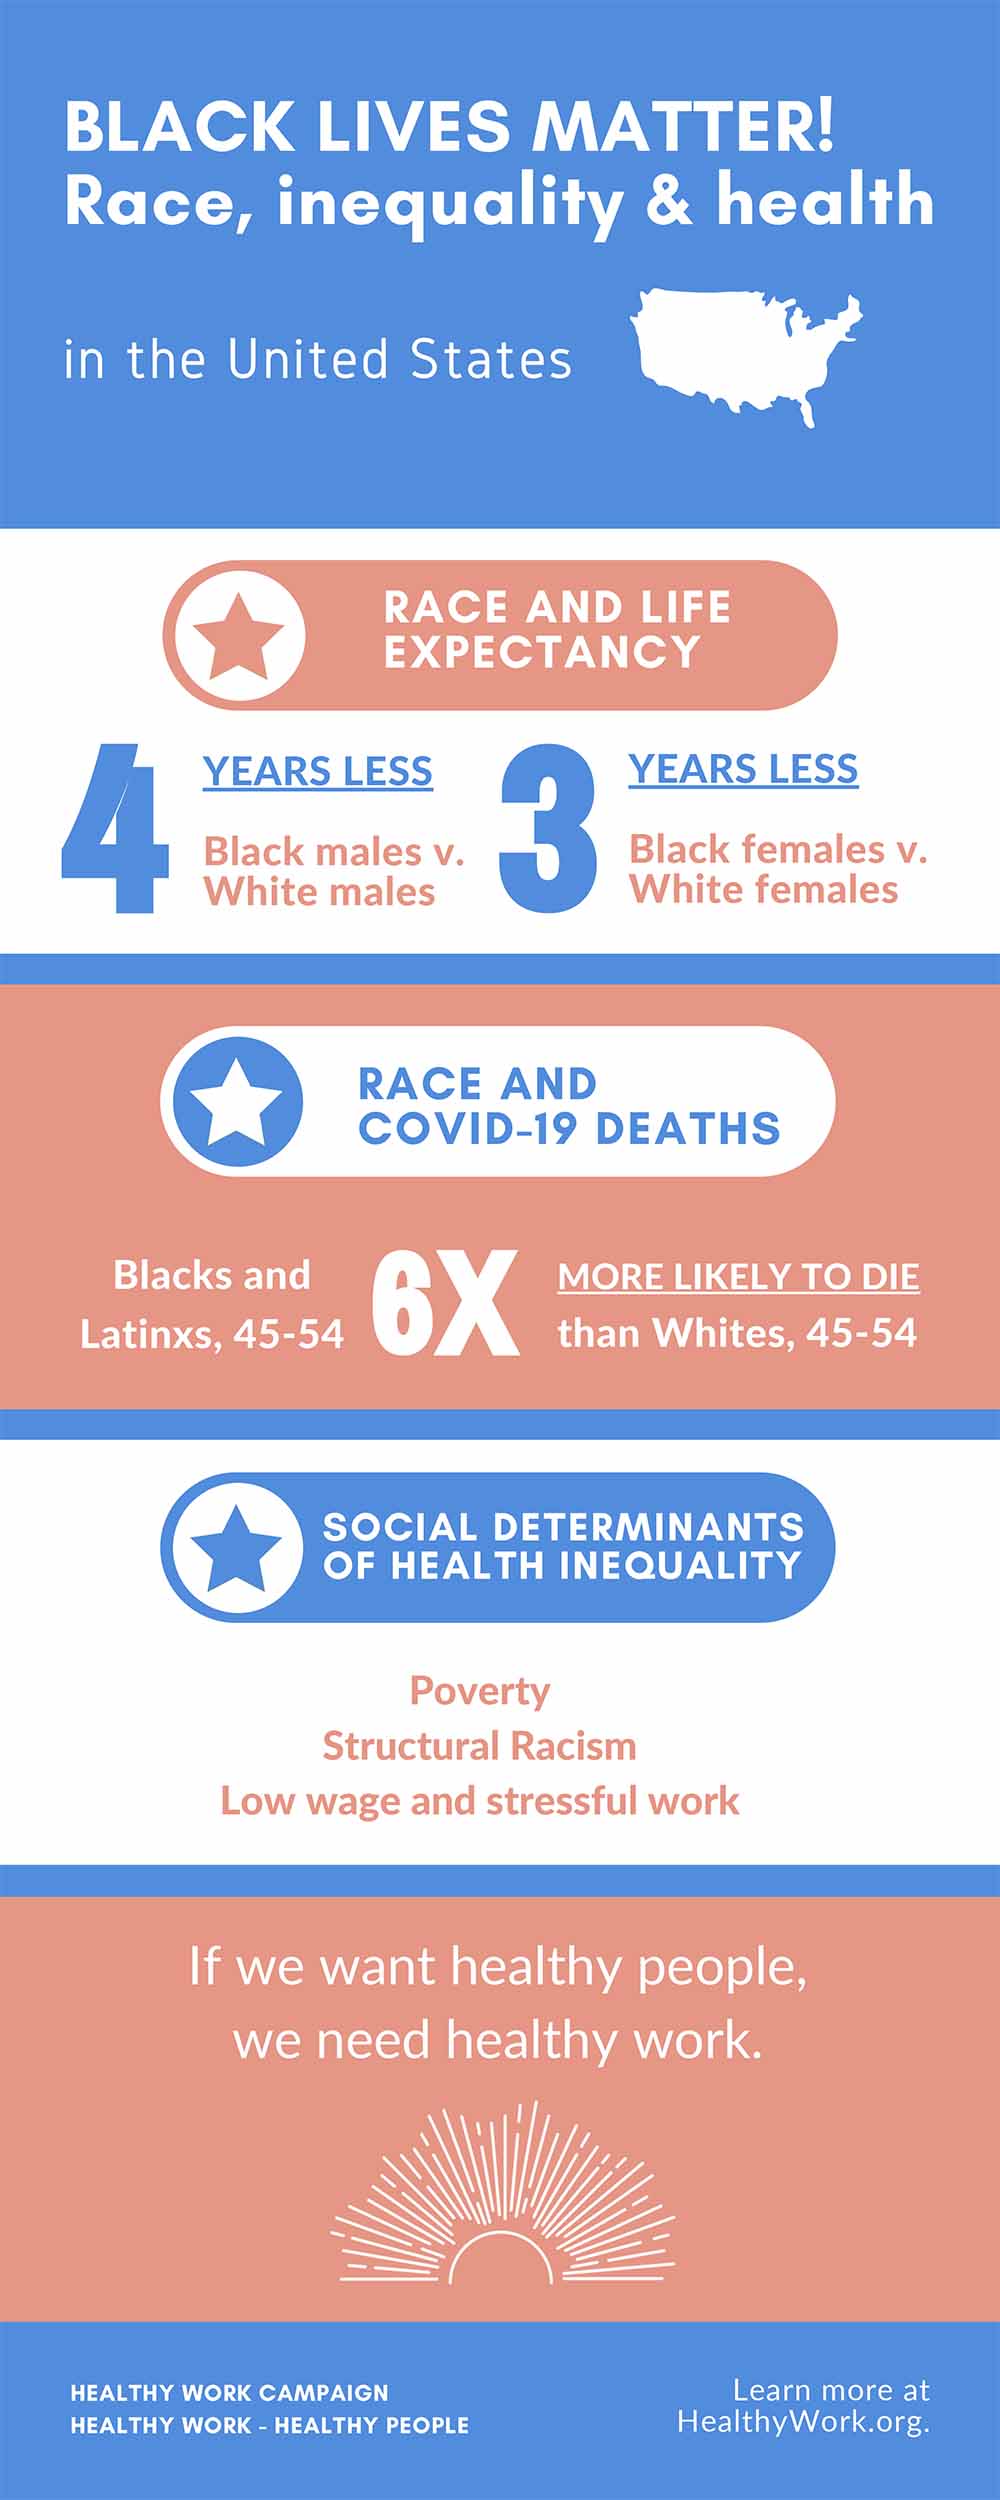 Infograph: BLACK LIVES MATTER! Race, Inequality and Health in the U.S.